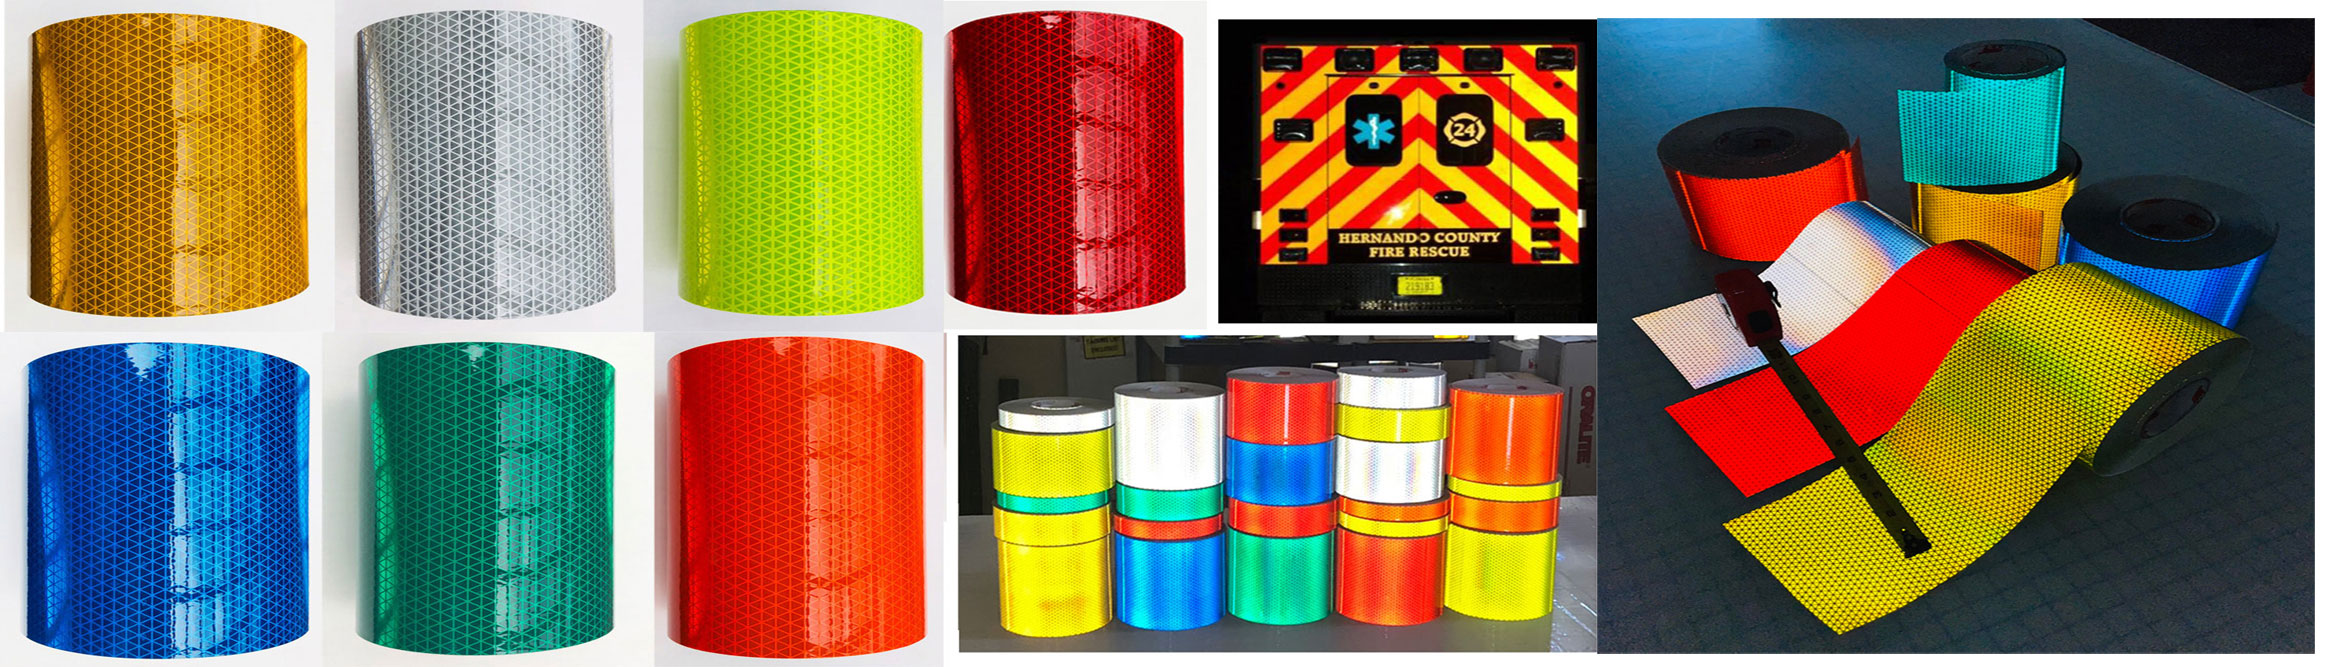 Oralite fluorescent lime red v98 conformable reflective tape